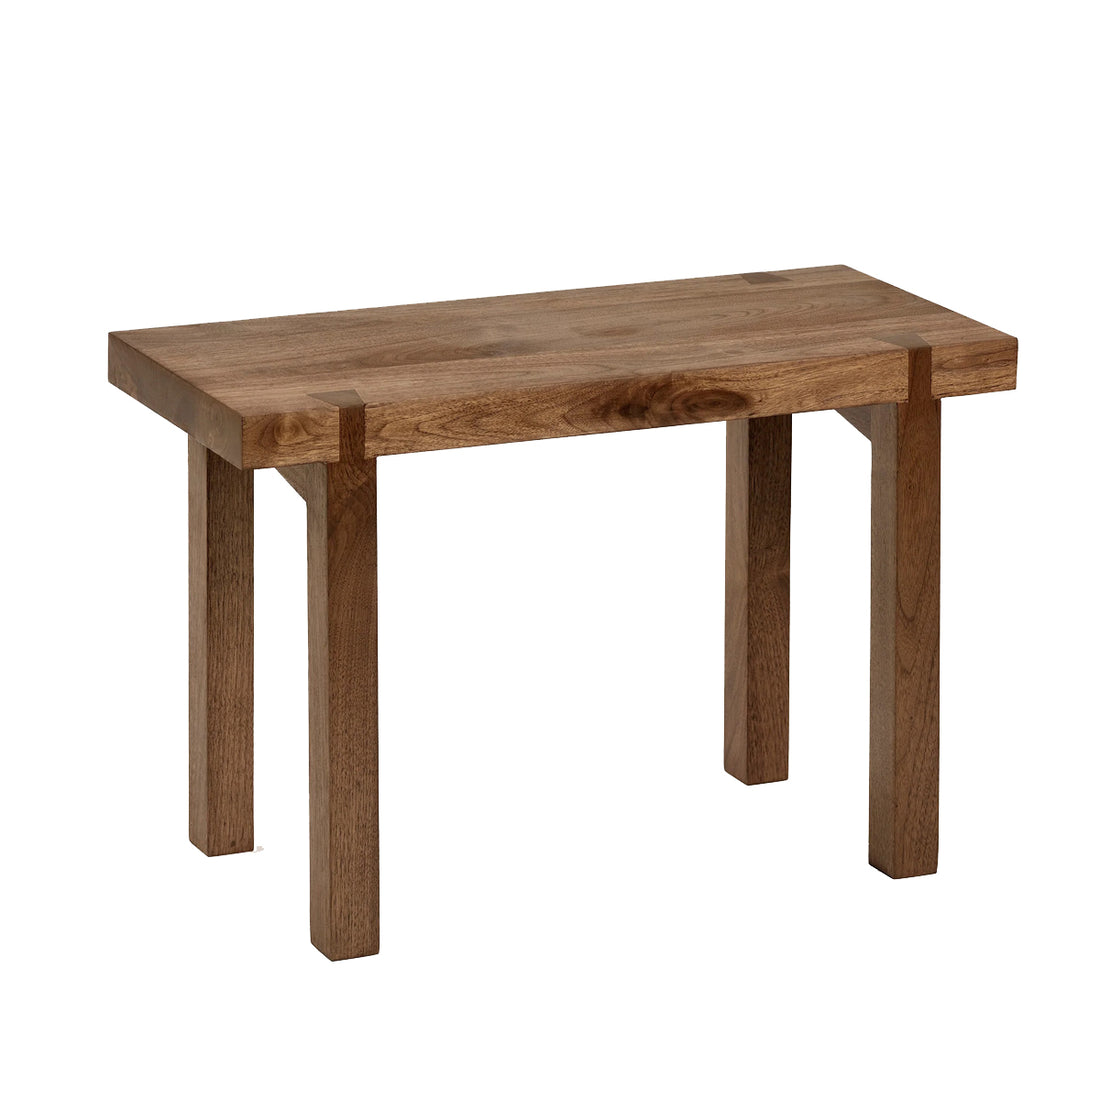 Valerie Objects bench S walnut solid